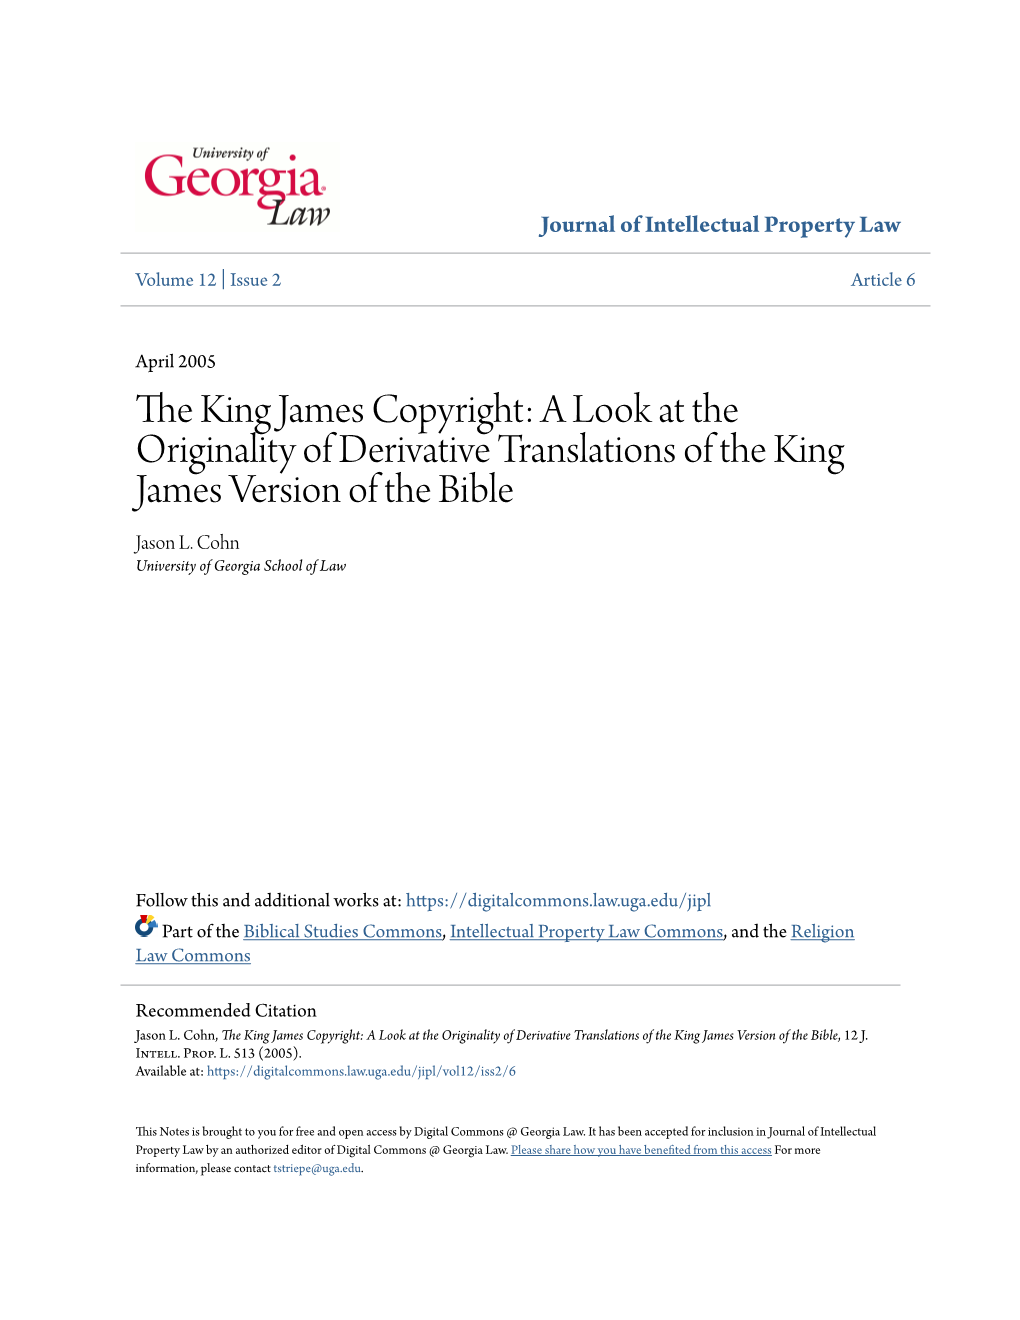 The King James Copyright: a Look at the Originality of Derivative Translations of the King James Version of the Bible Jason L